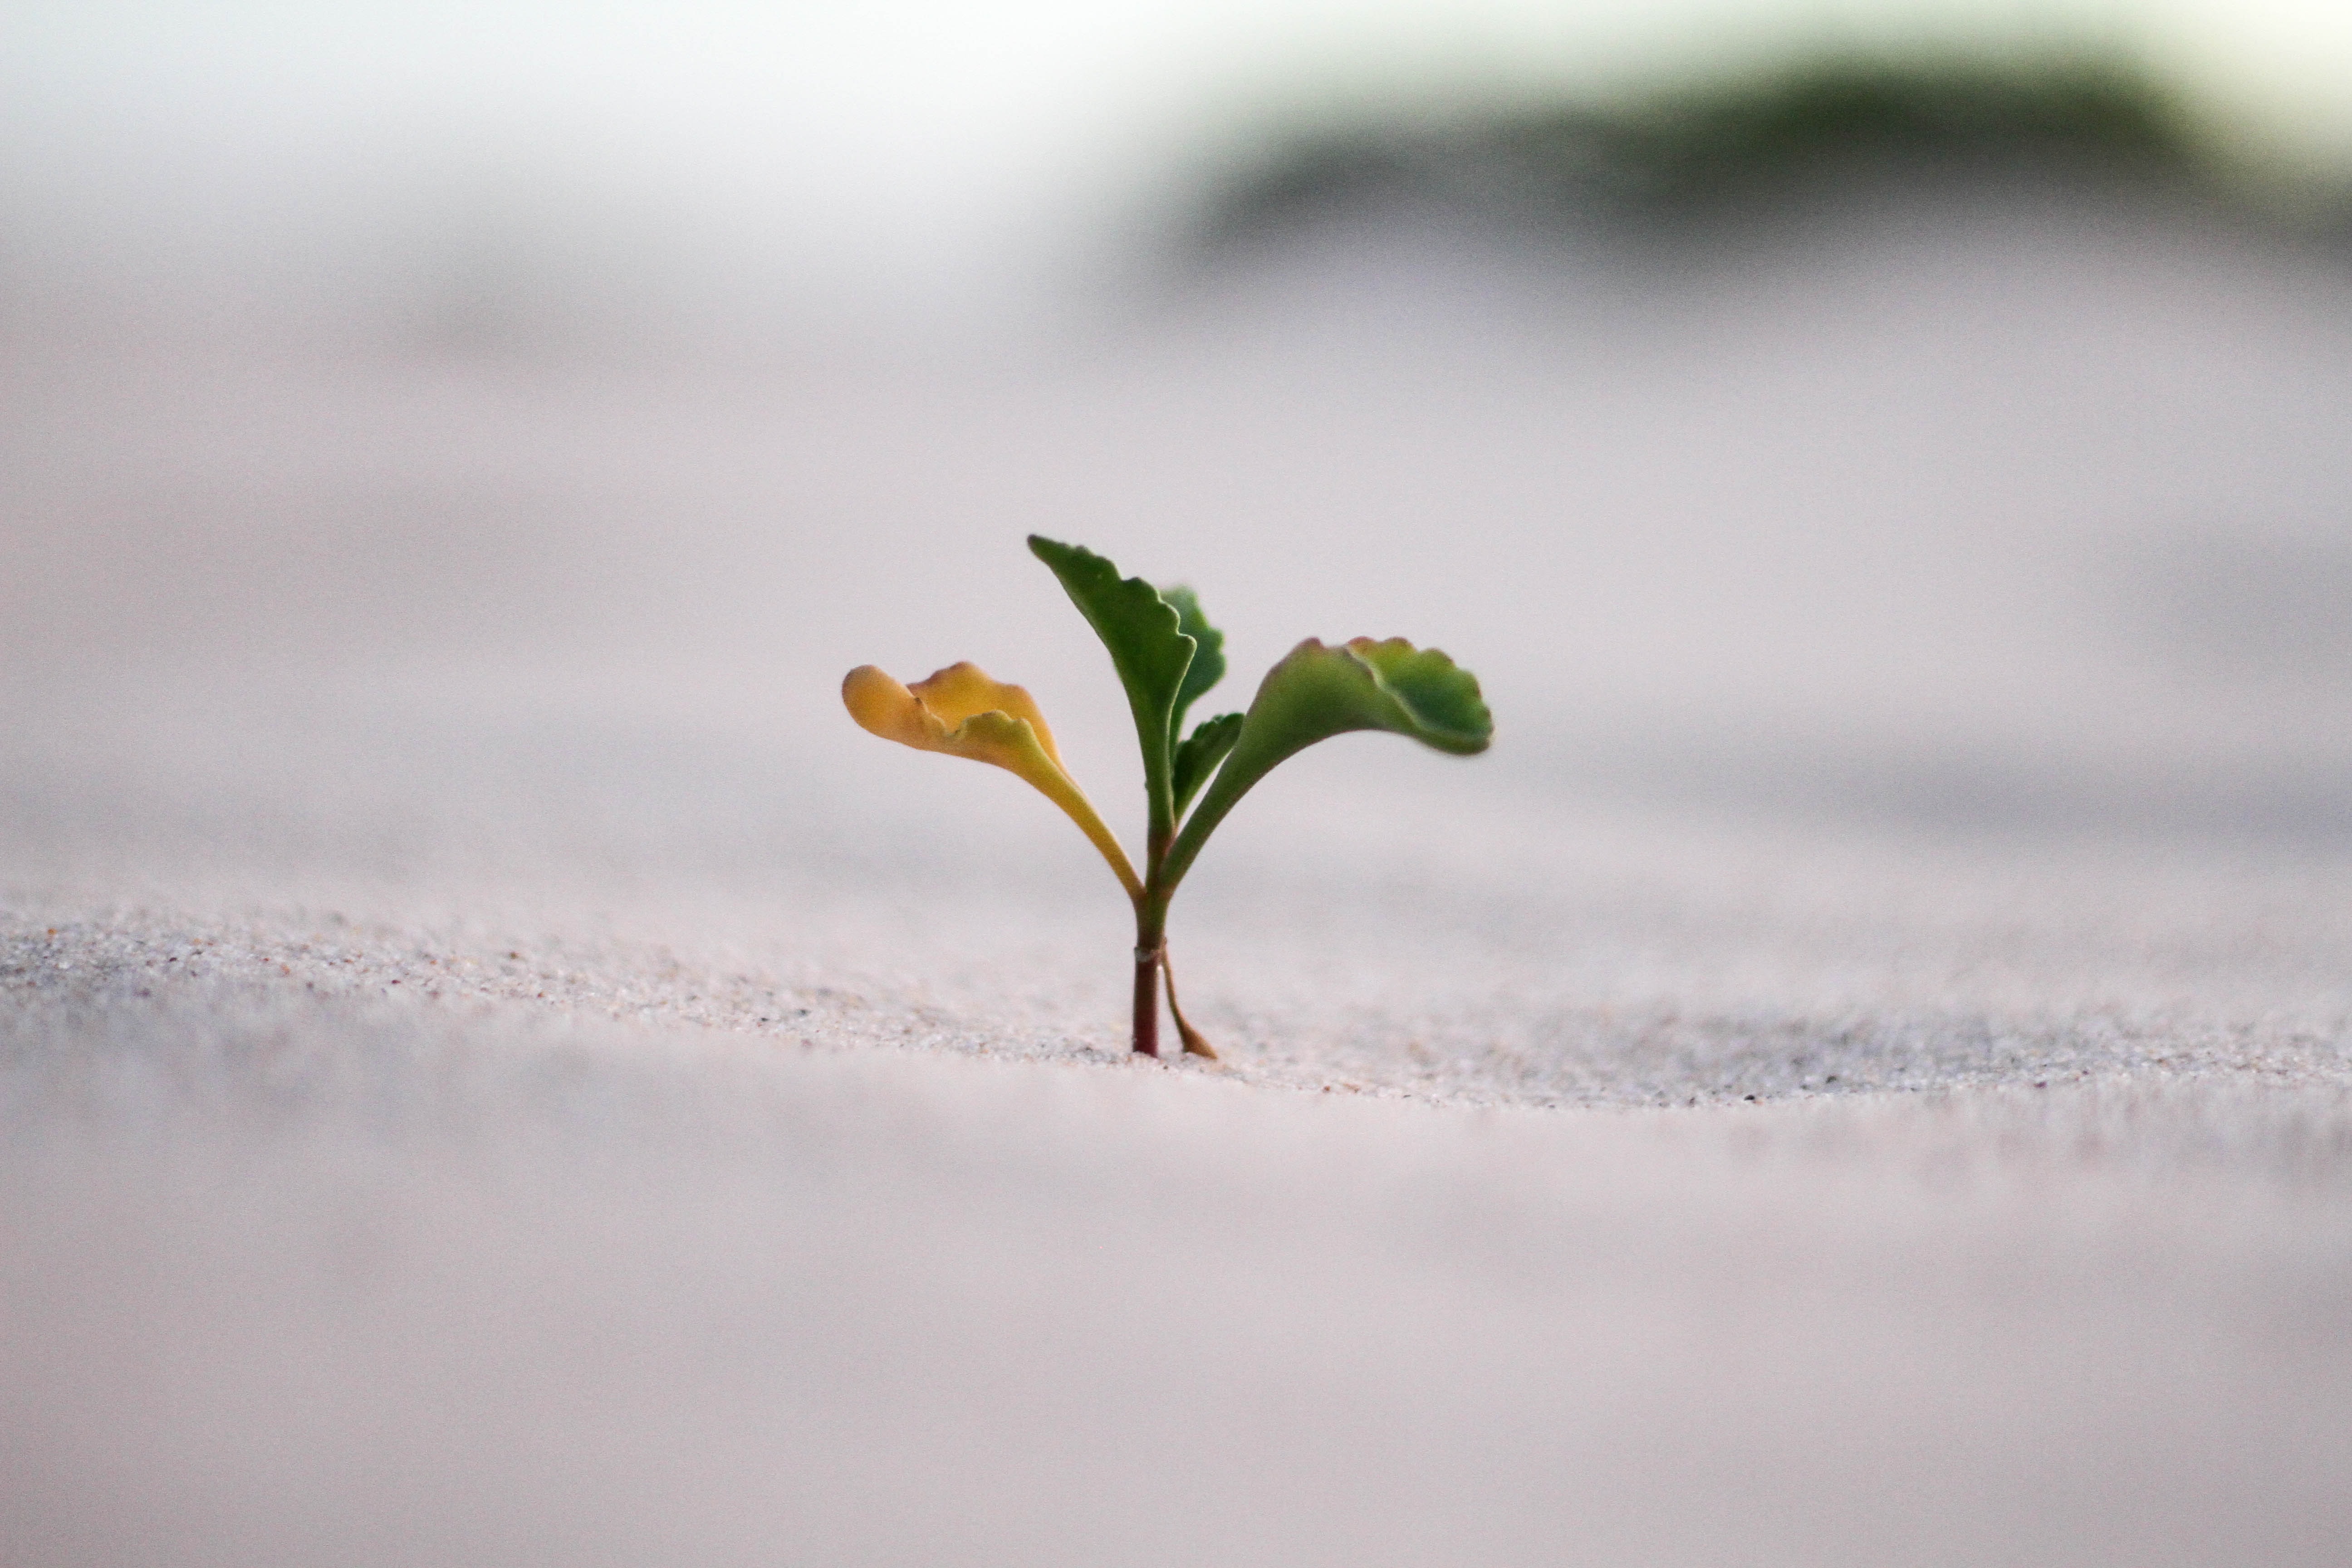 photo of plant growing in desert to portray resilience